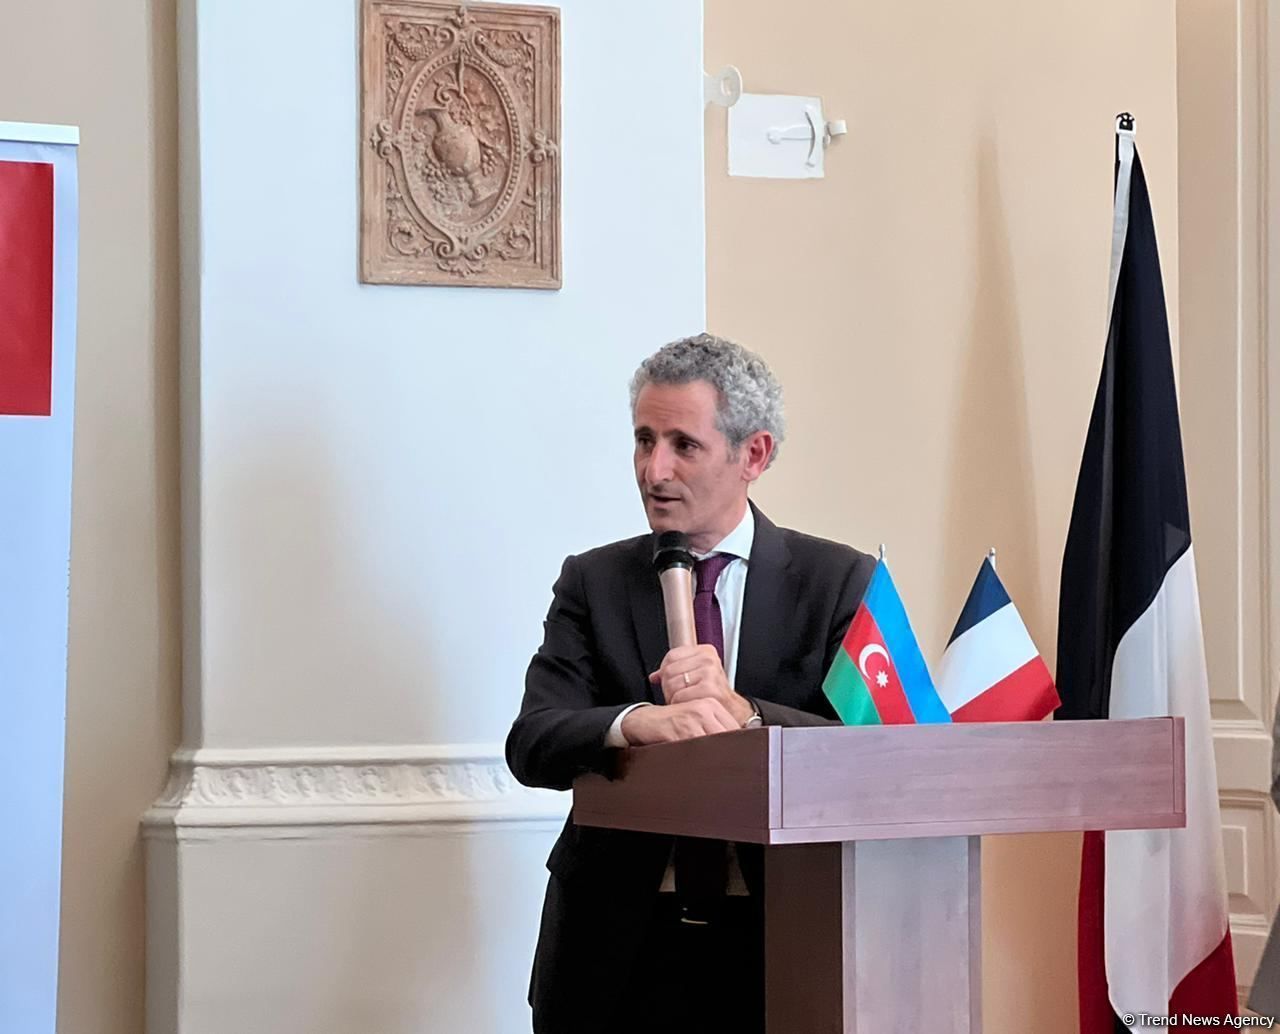 France promoting new education projects in Azerbaijan - ambassador